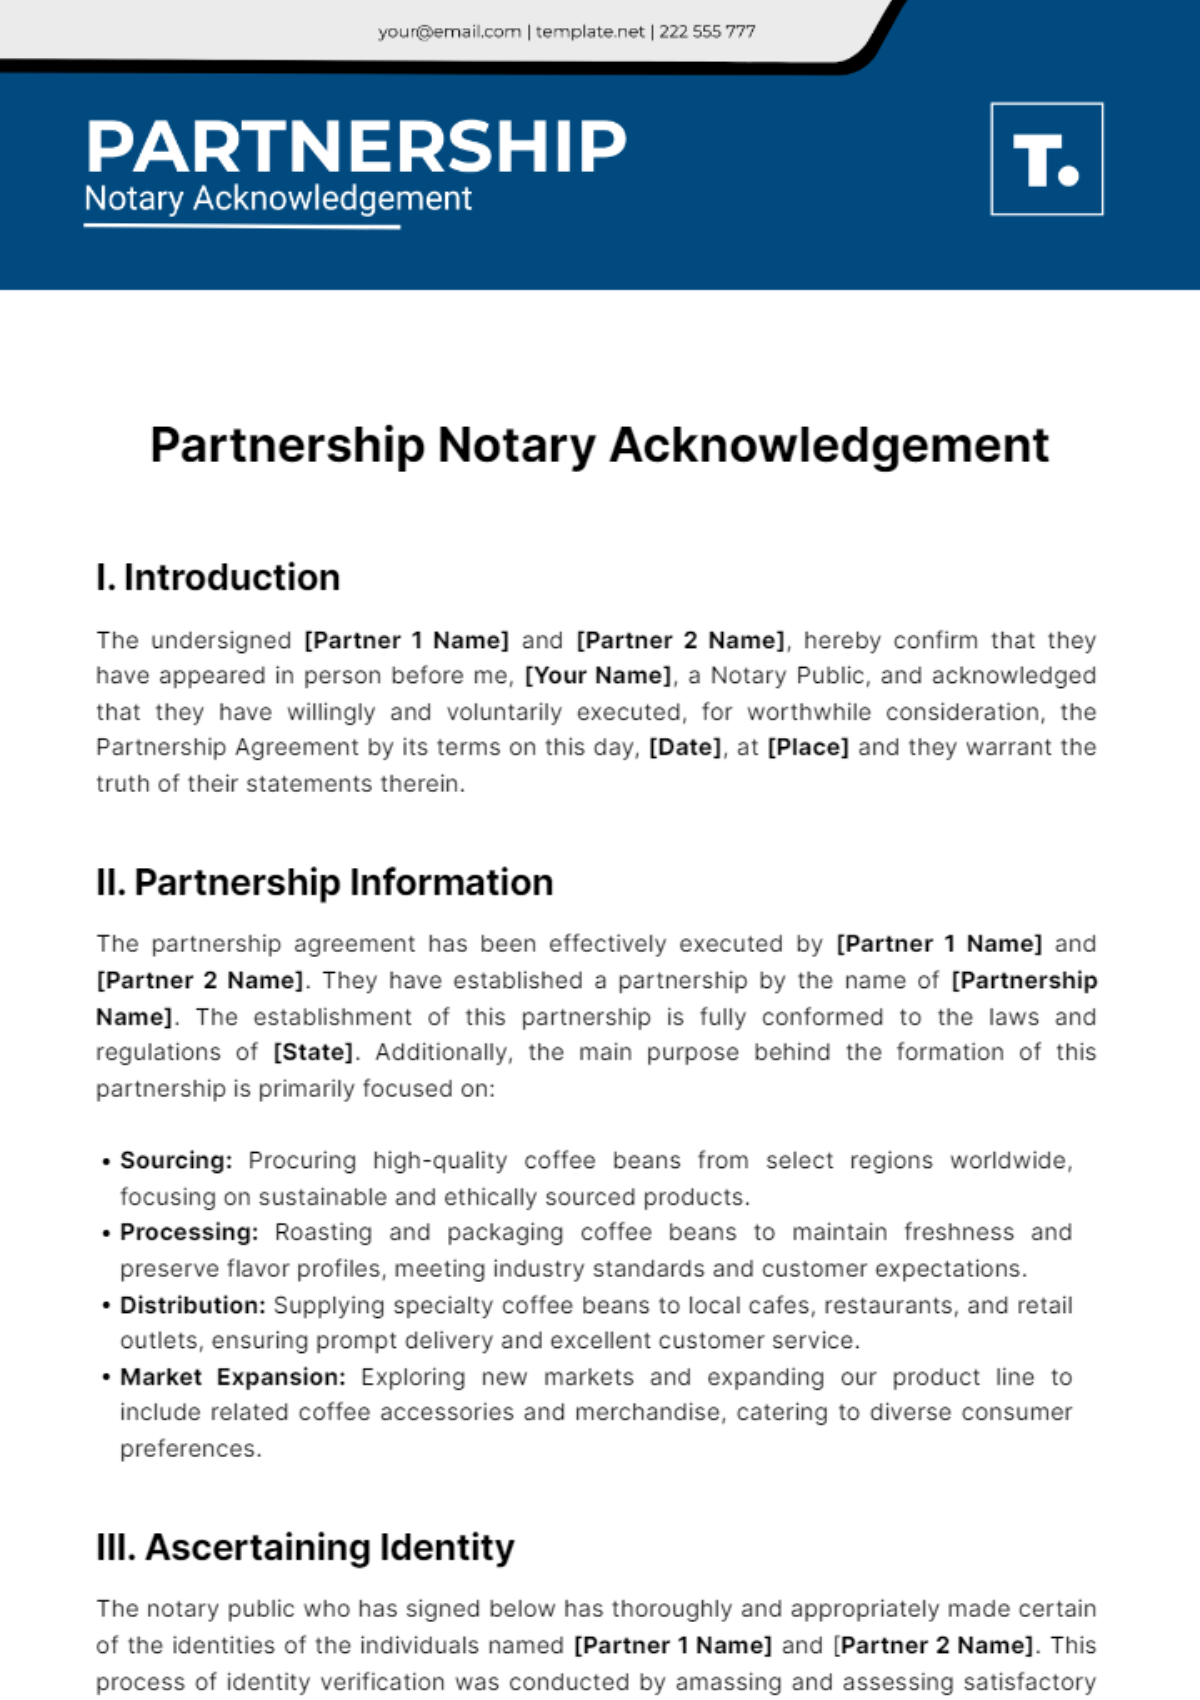 Partnership Notary Acknowledgement Template